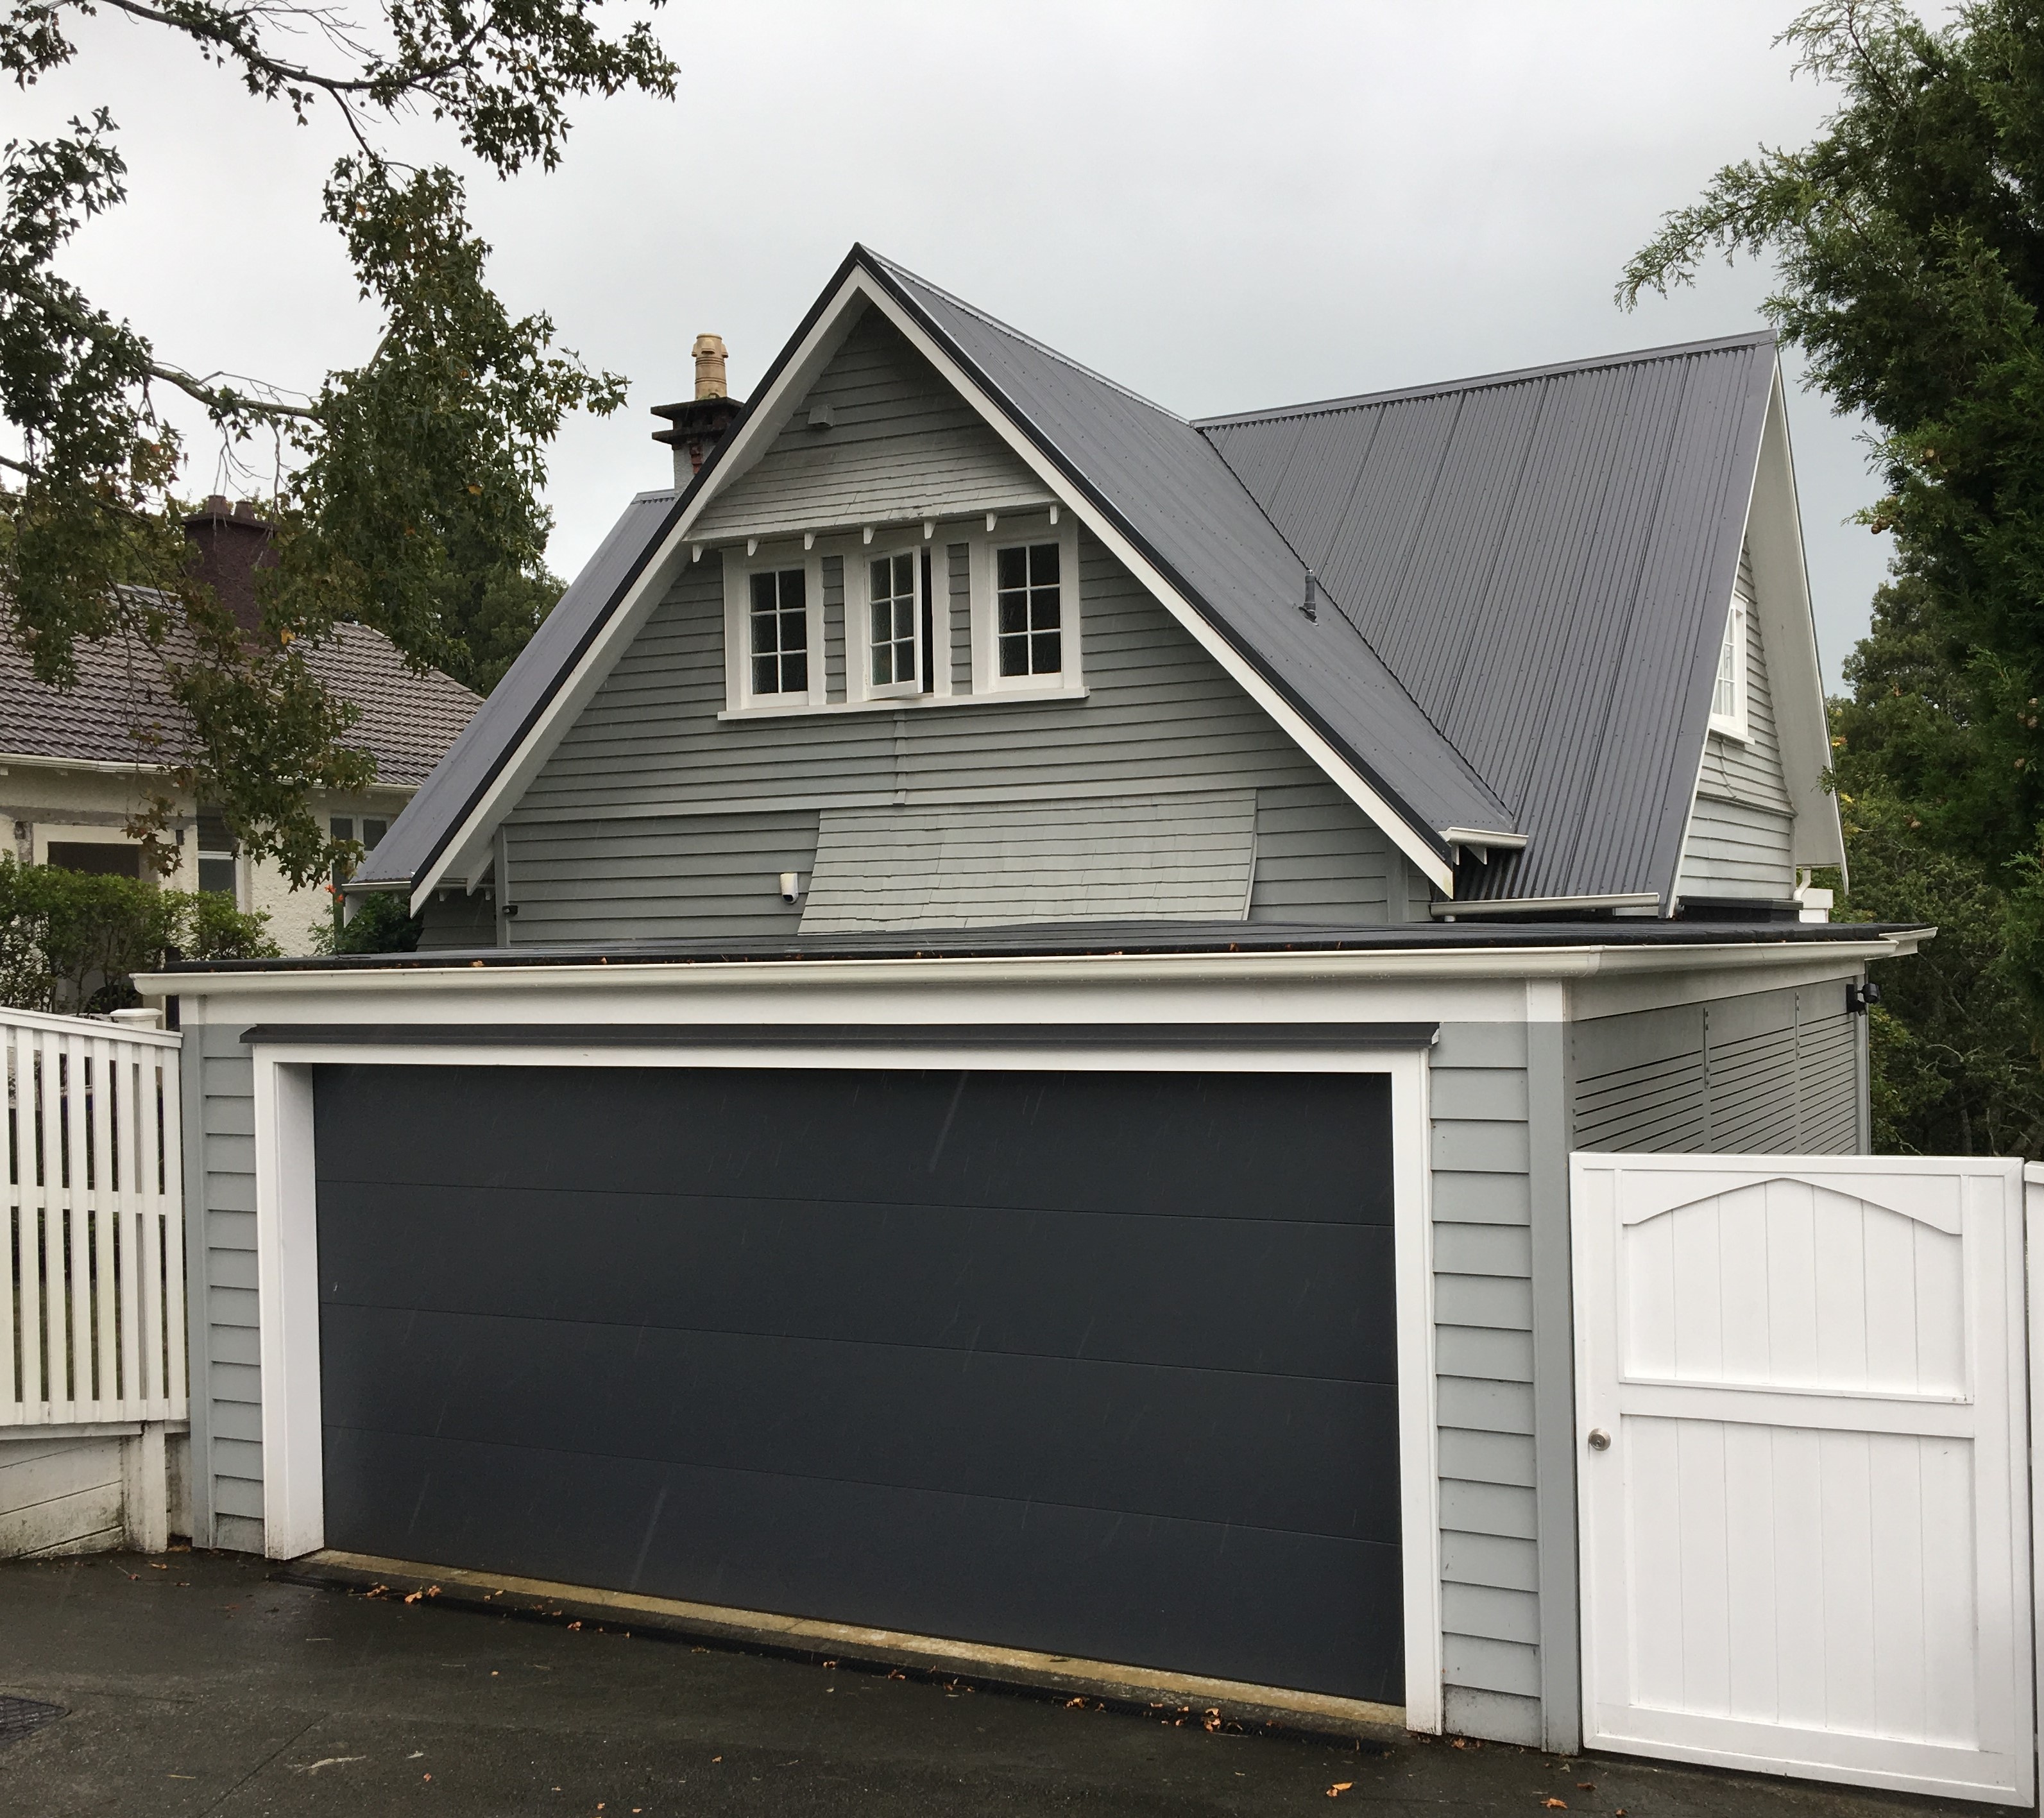 Laurie Avenue, Parnell, Auckland